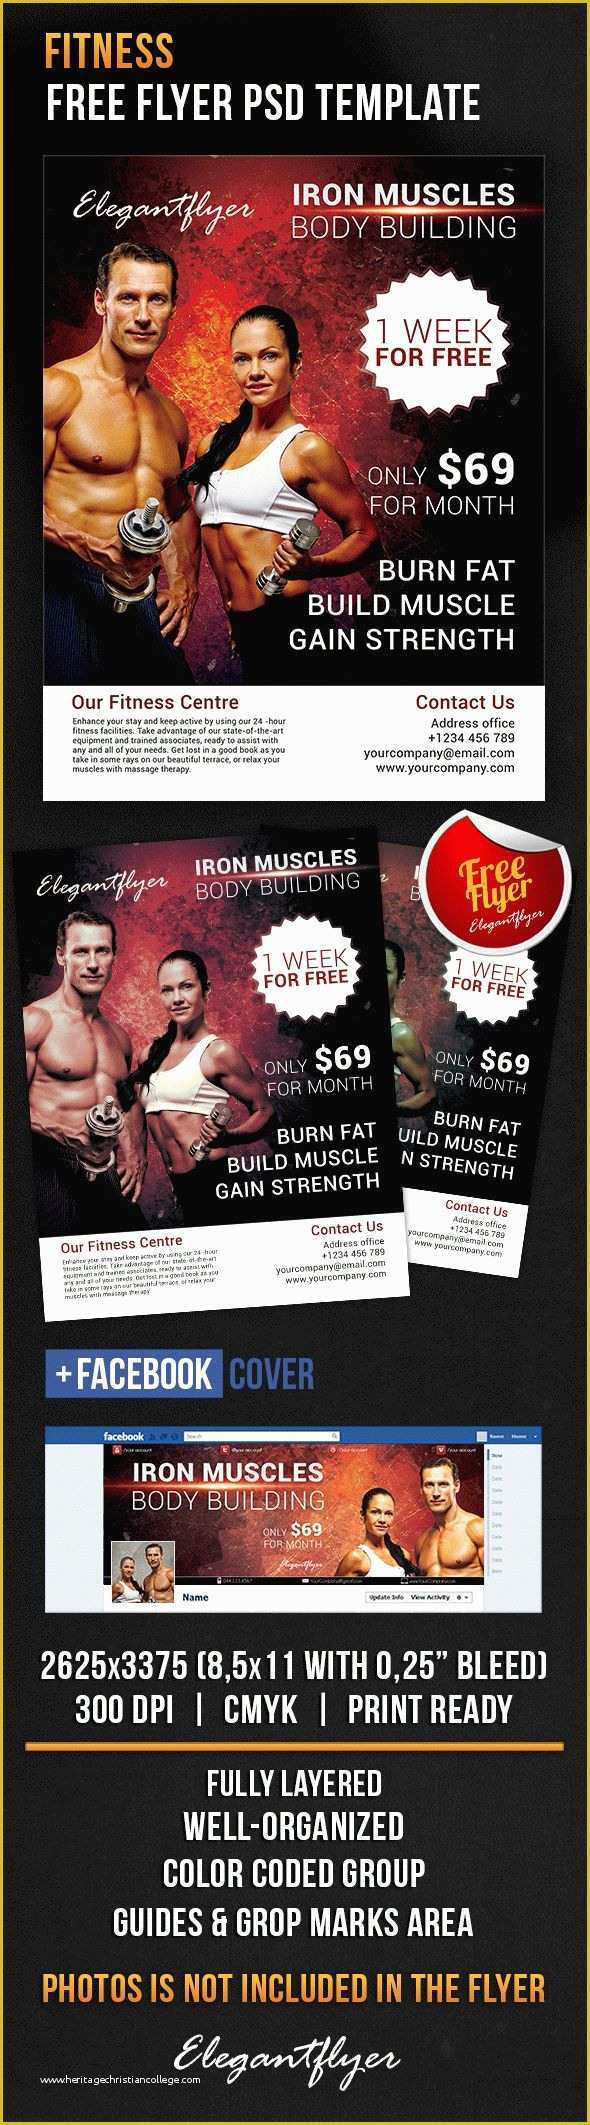 Fitness Poster Template Free Of Fitness Flyer – Free Psd Flyer Template – by Elegantflyer